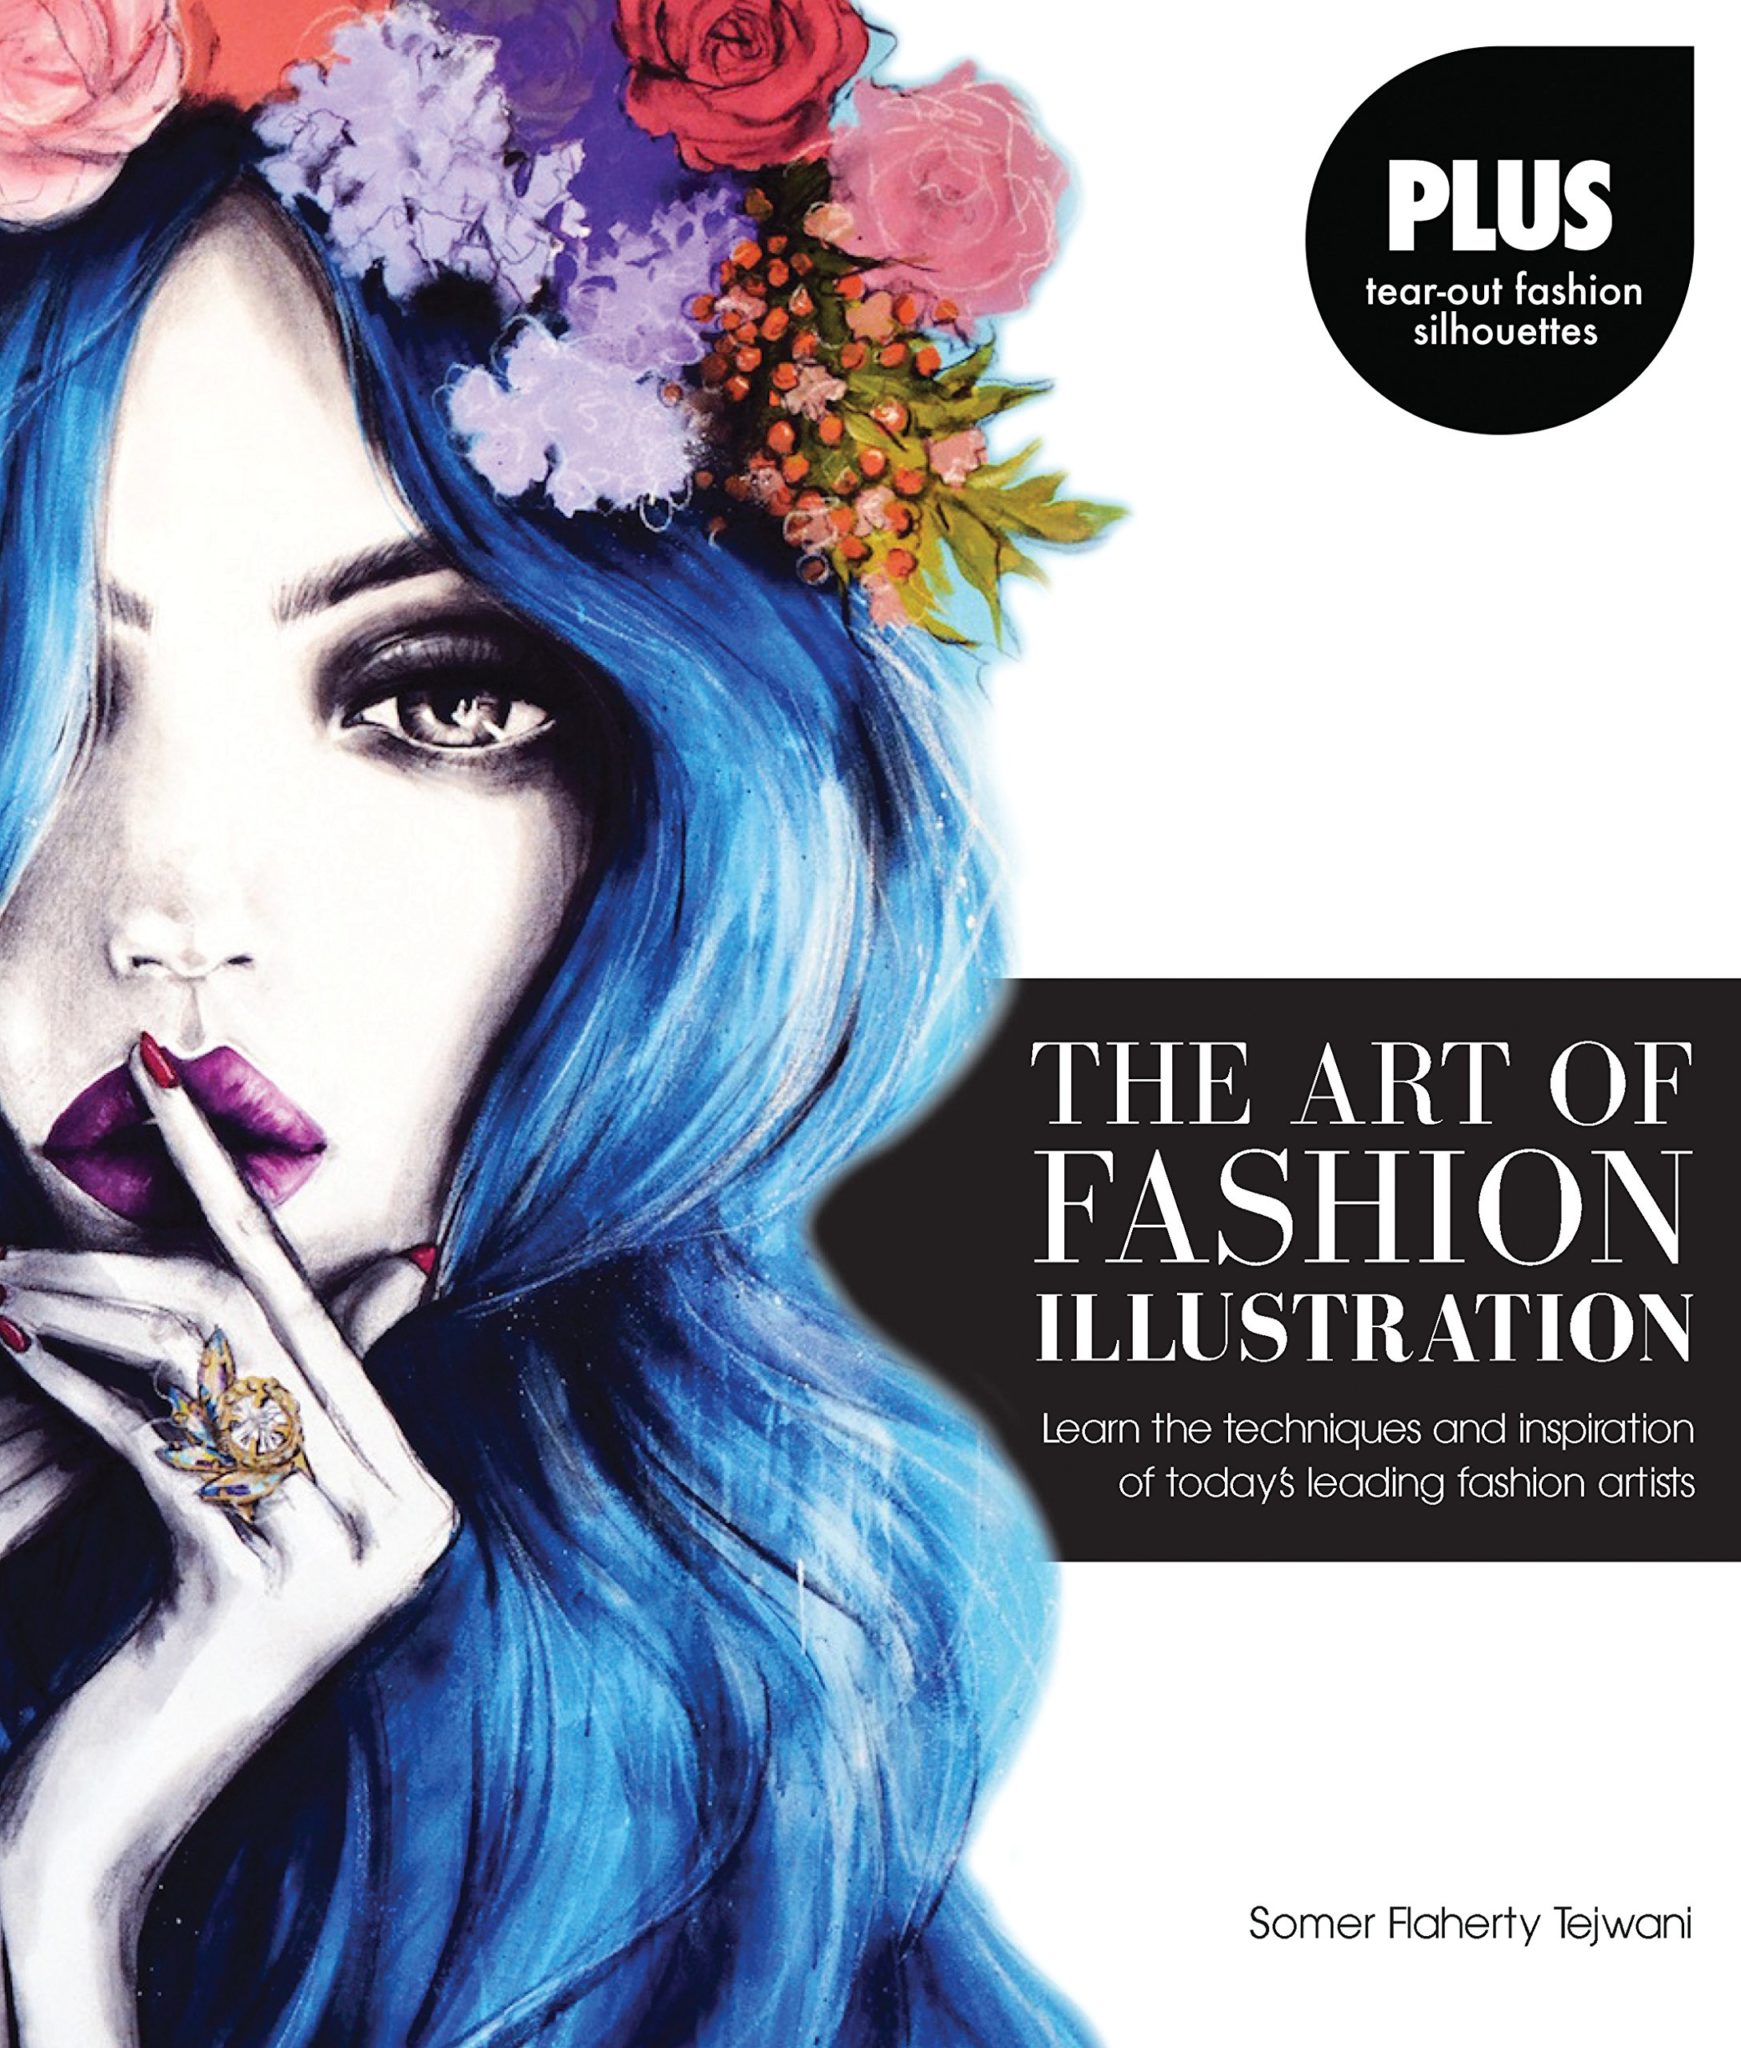 The Art of Fashion Illustration: Learn the techniques and inspirations of today’s leading fashion artists